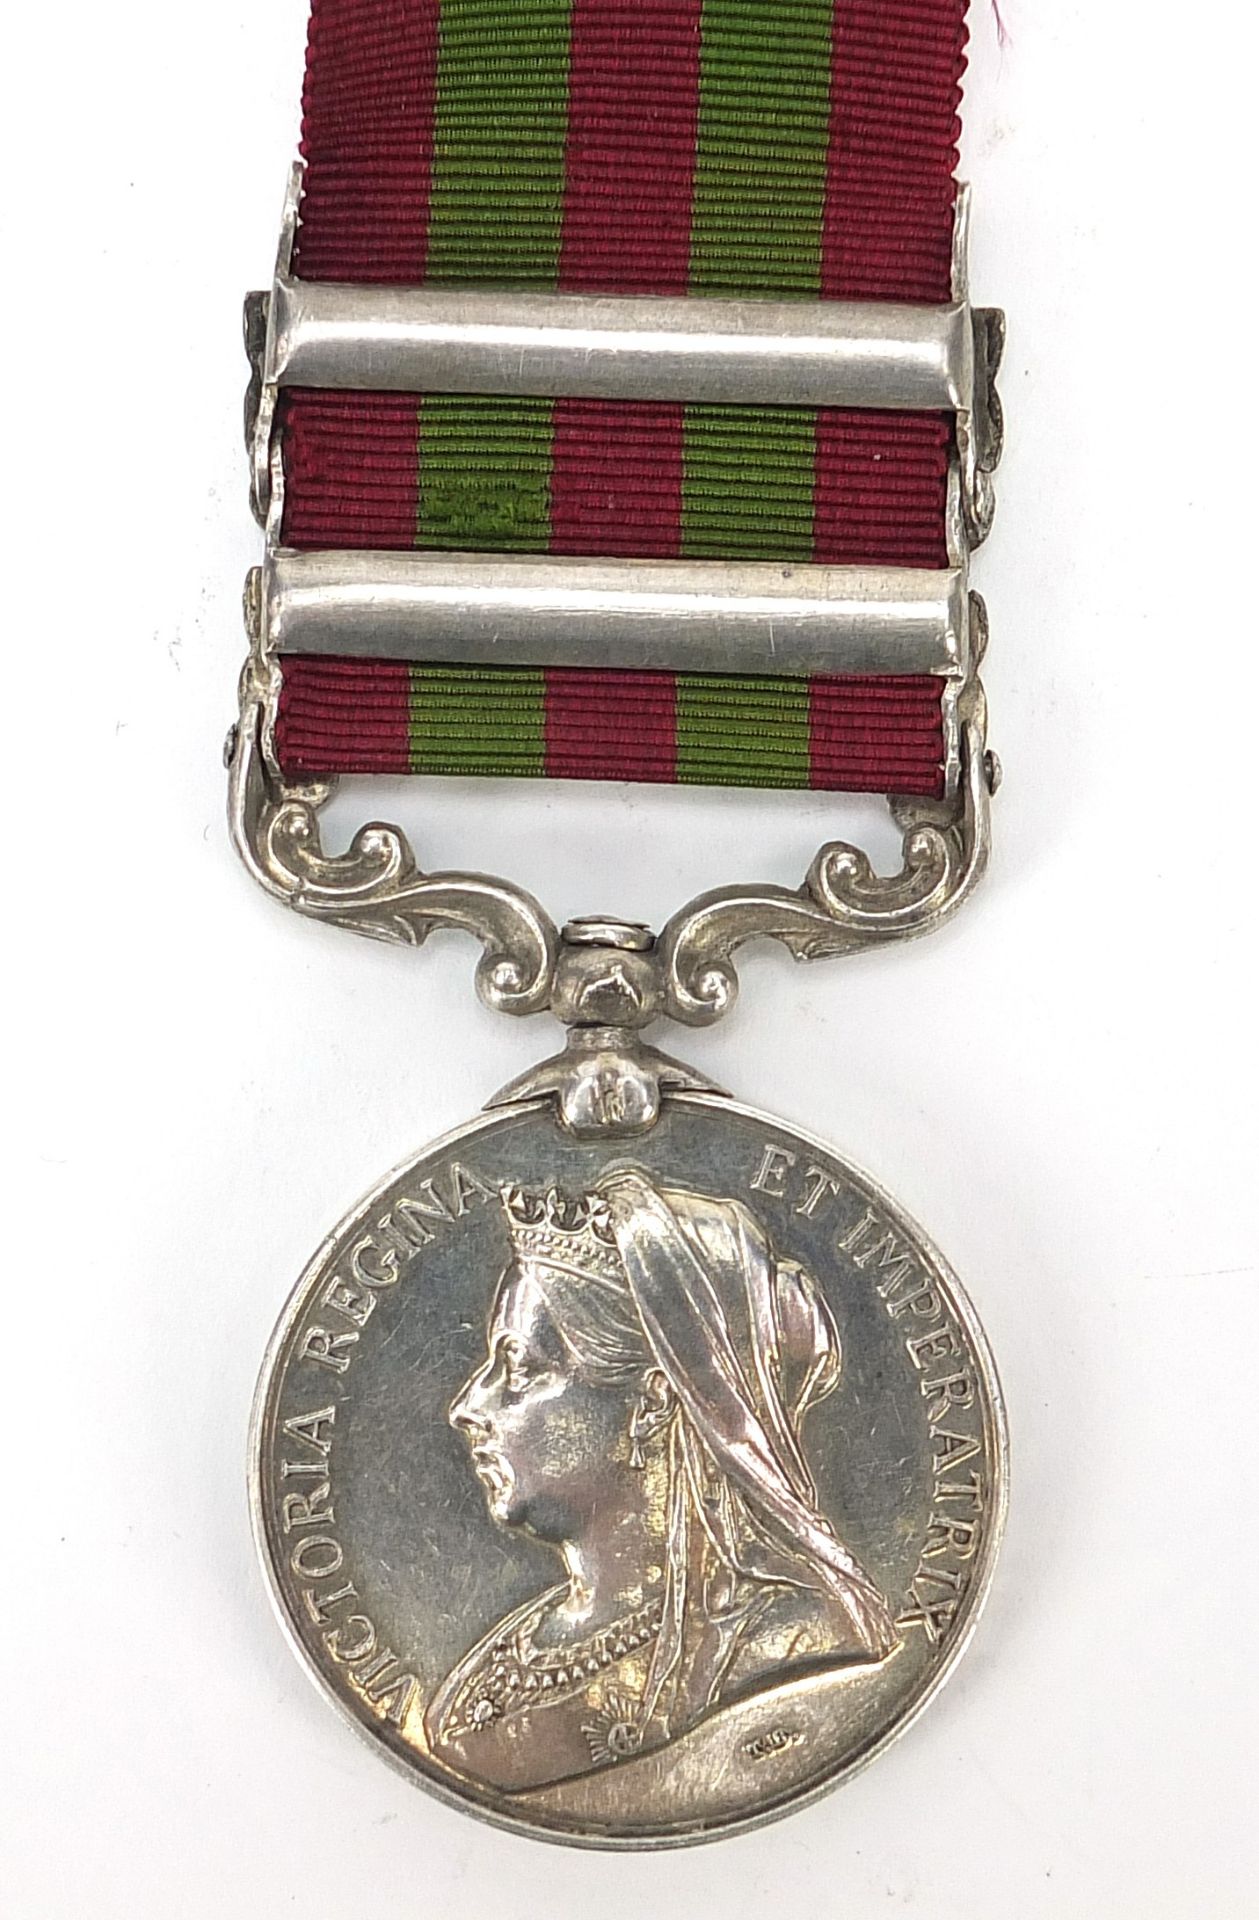 Victorian British military India medal with Punjab Frontier 1897-98 and Tirah 1897-98 bars awarded - Image 2 of 3